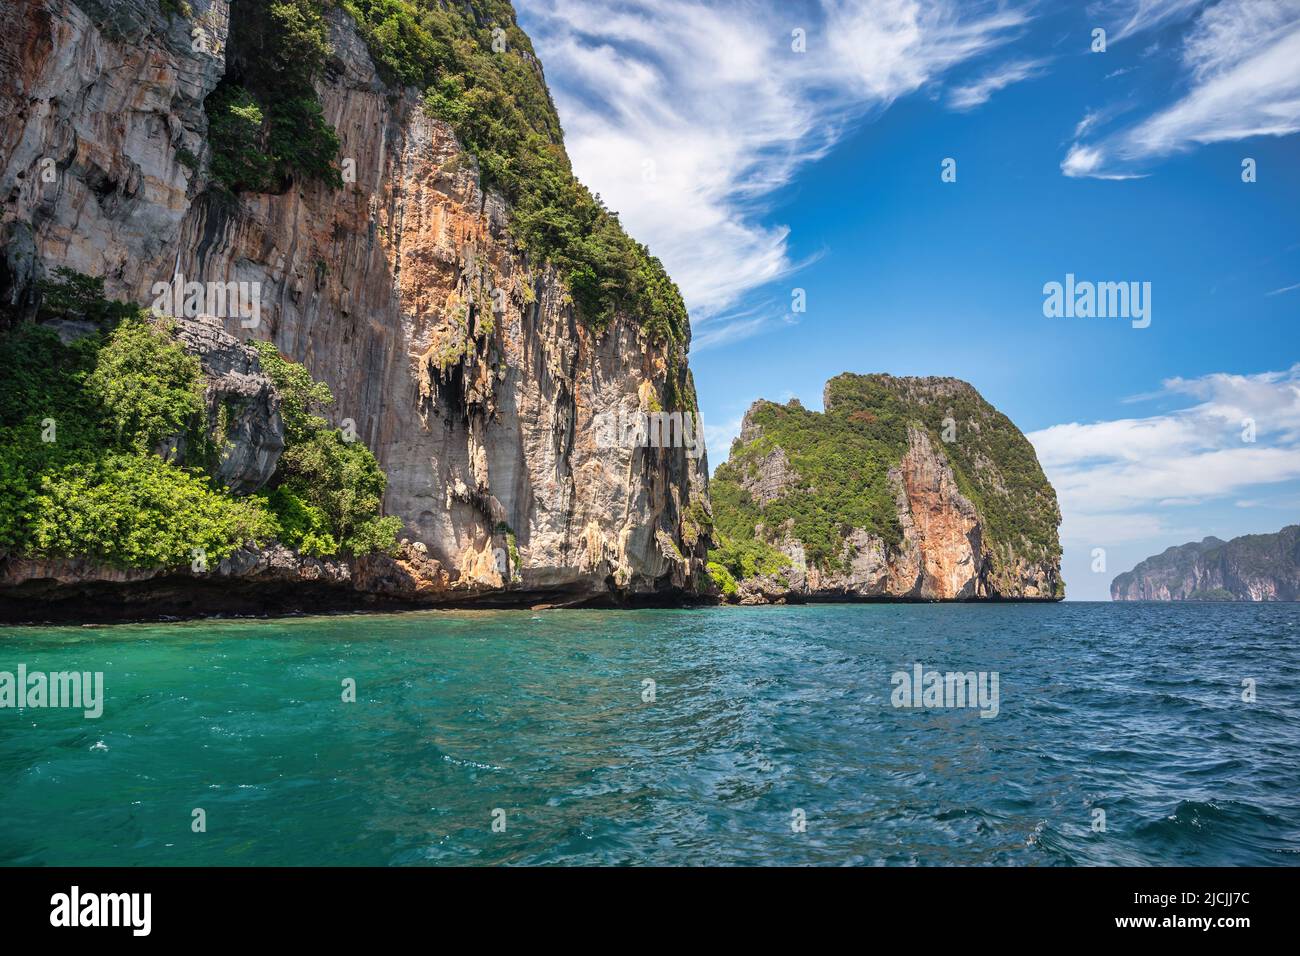 Tropical islands view with locean blue sea water at Phi Phi Islands, Krabi Thailand nature landscape Stock Photo